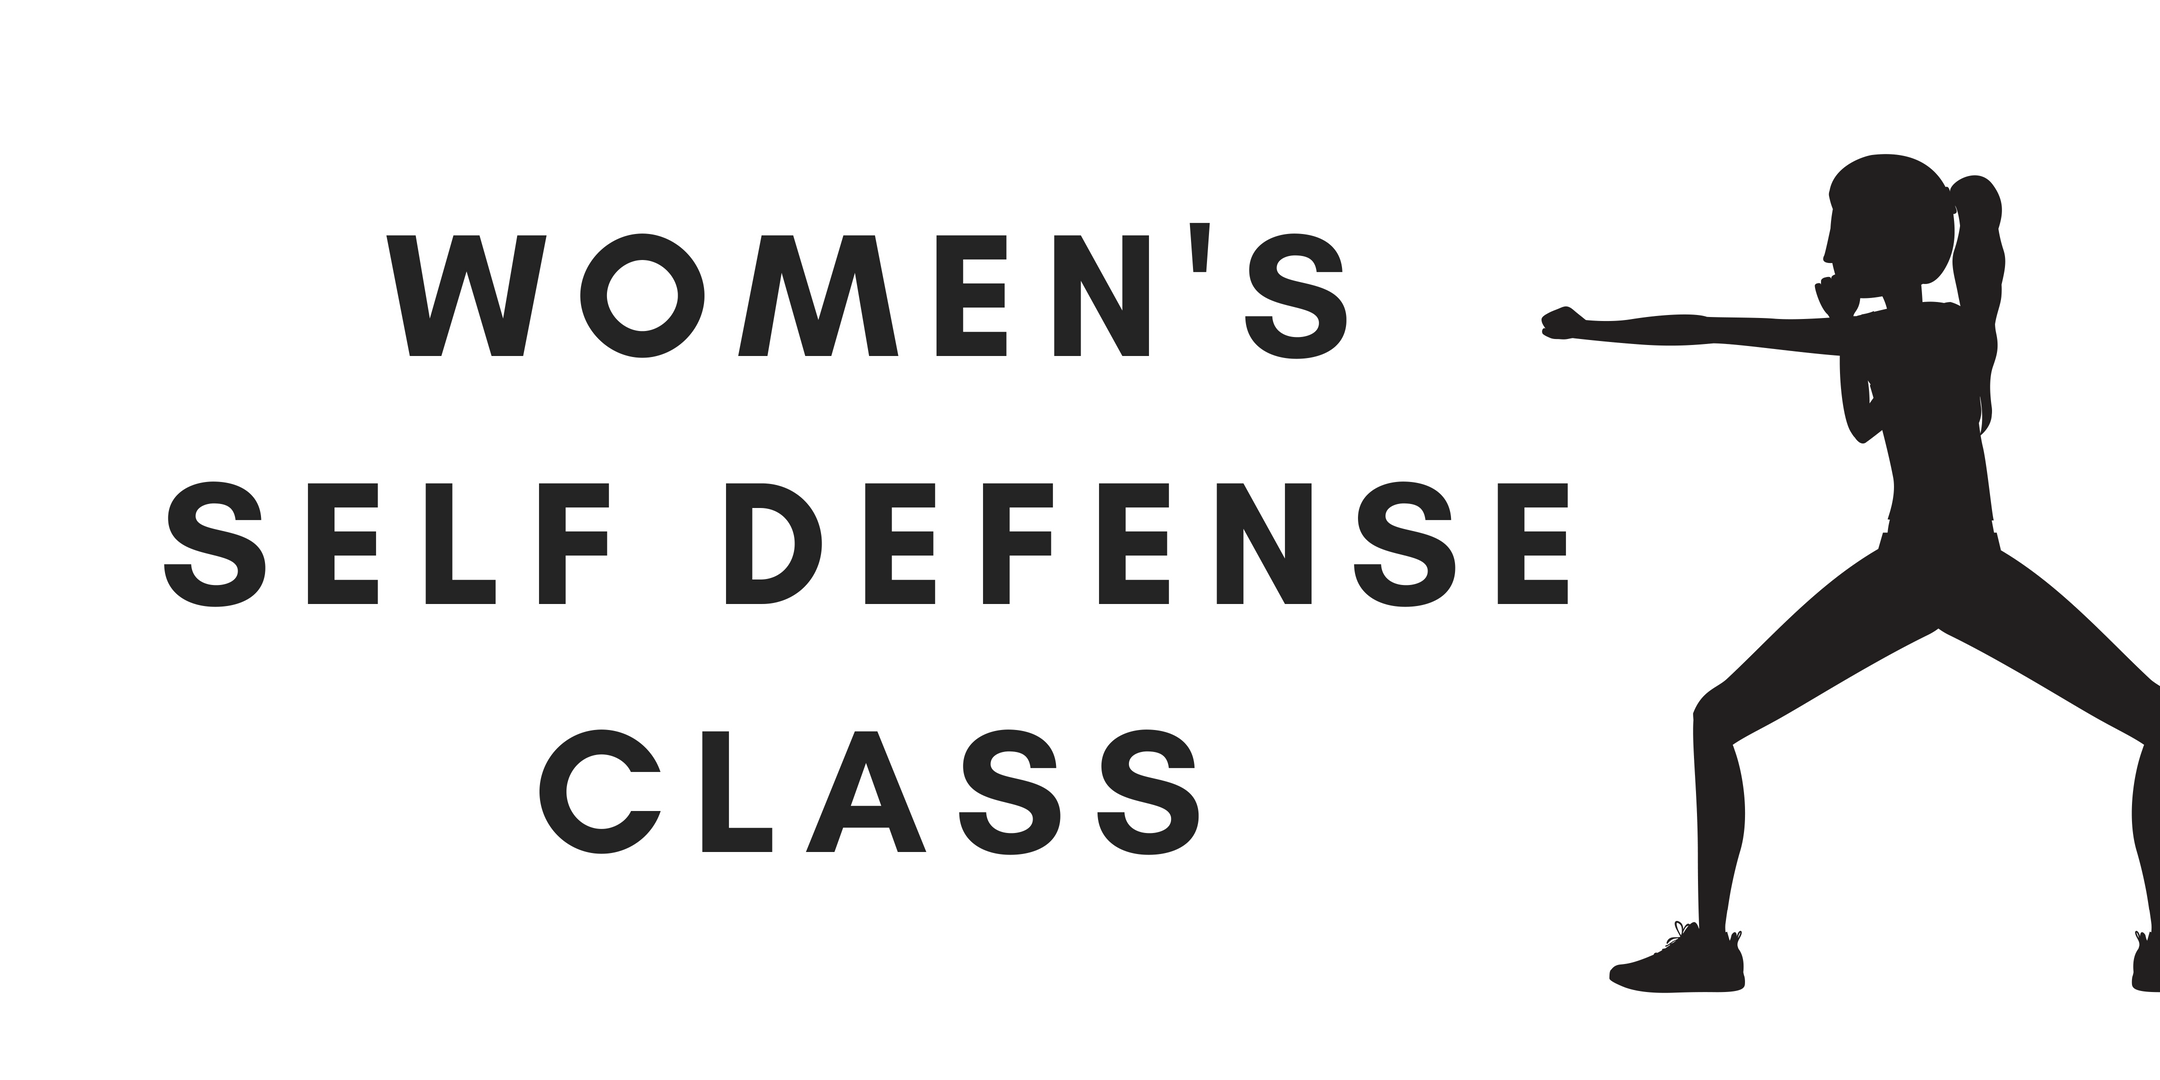 Silhouette of a female in a fighting stance, legs apart and arms extended. Women's self defense class spelled out. 